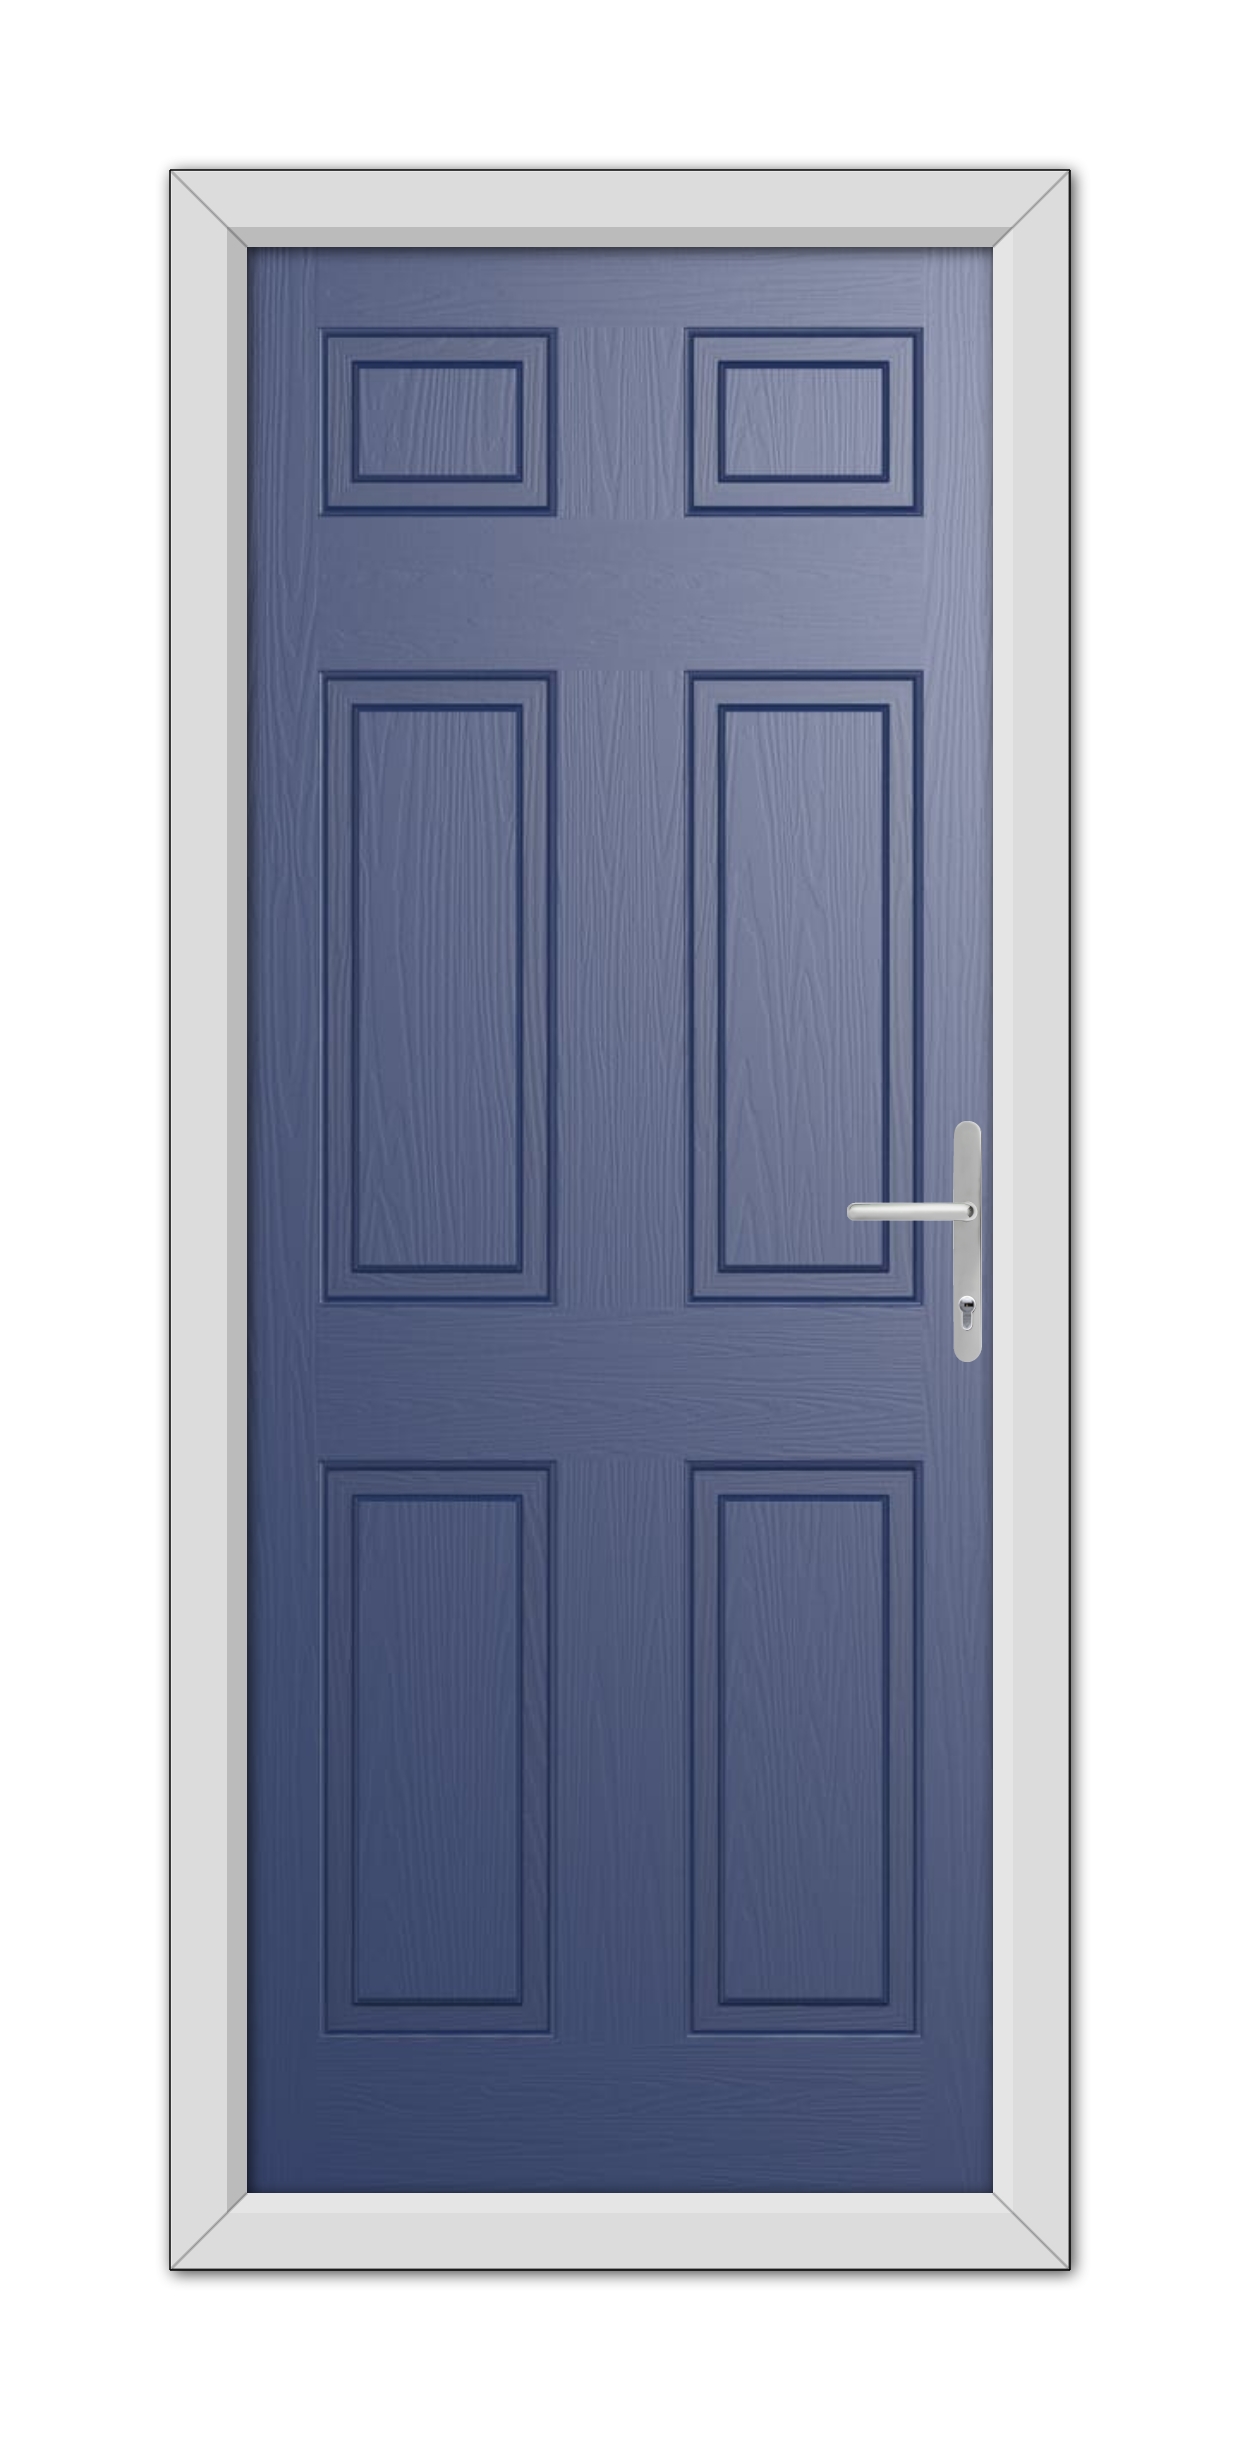 A Blue Middleton Solid Composite Door 48mm Timber Core with six panels and a silver handle, set within a white door frame, isolated on a white background.